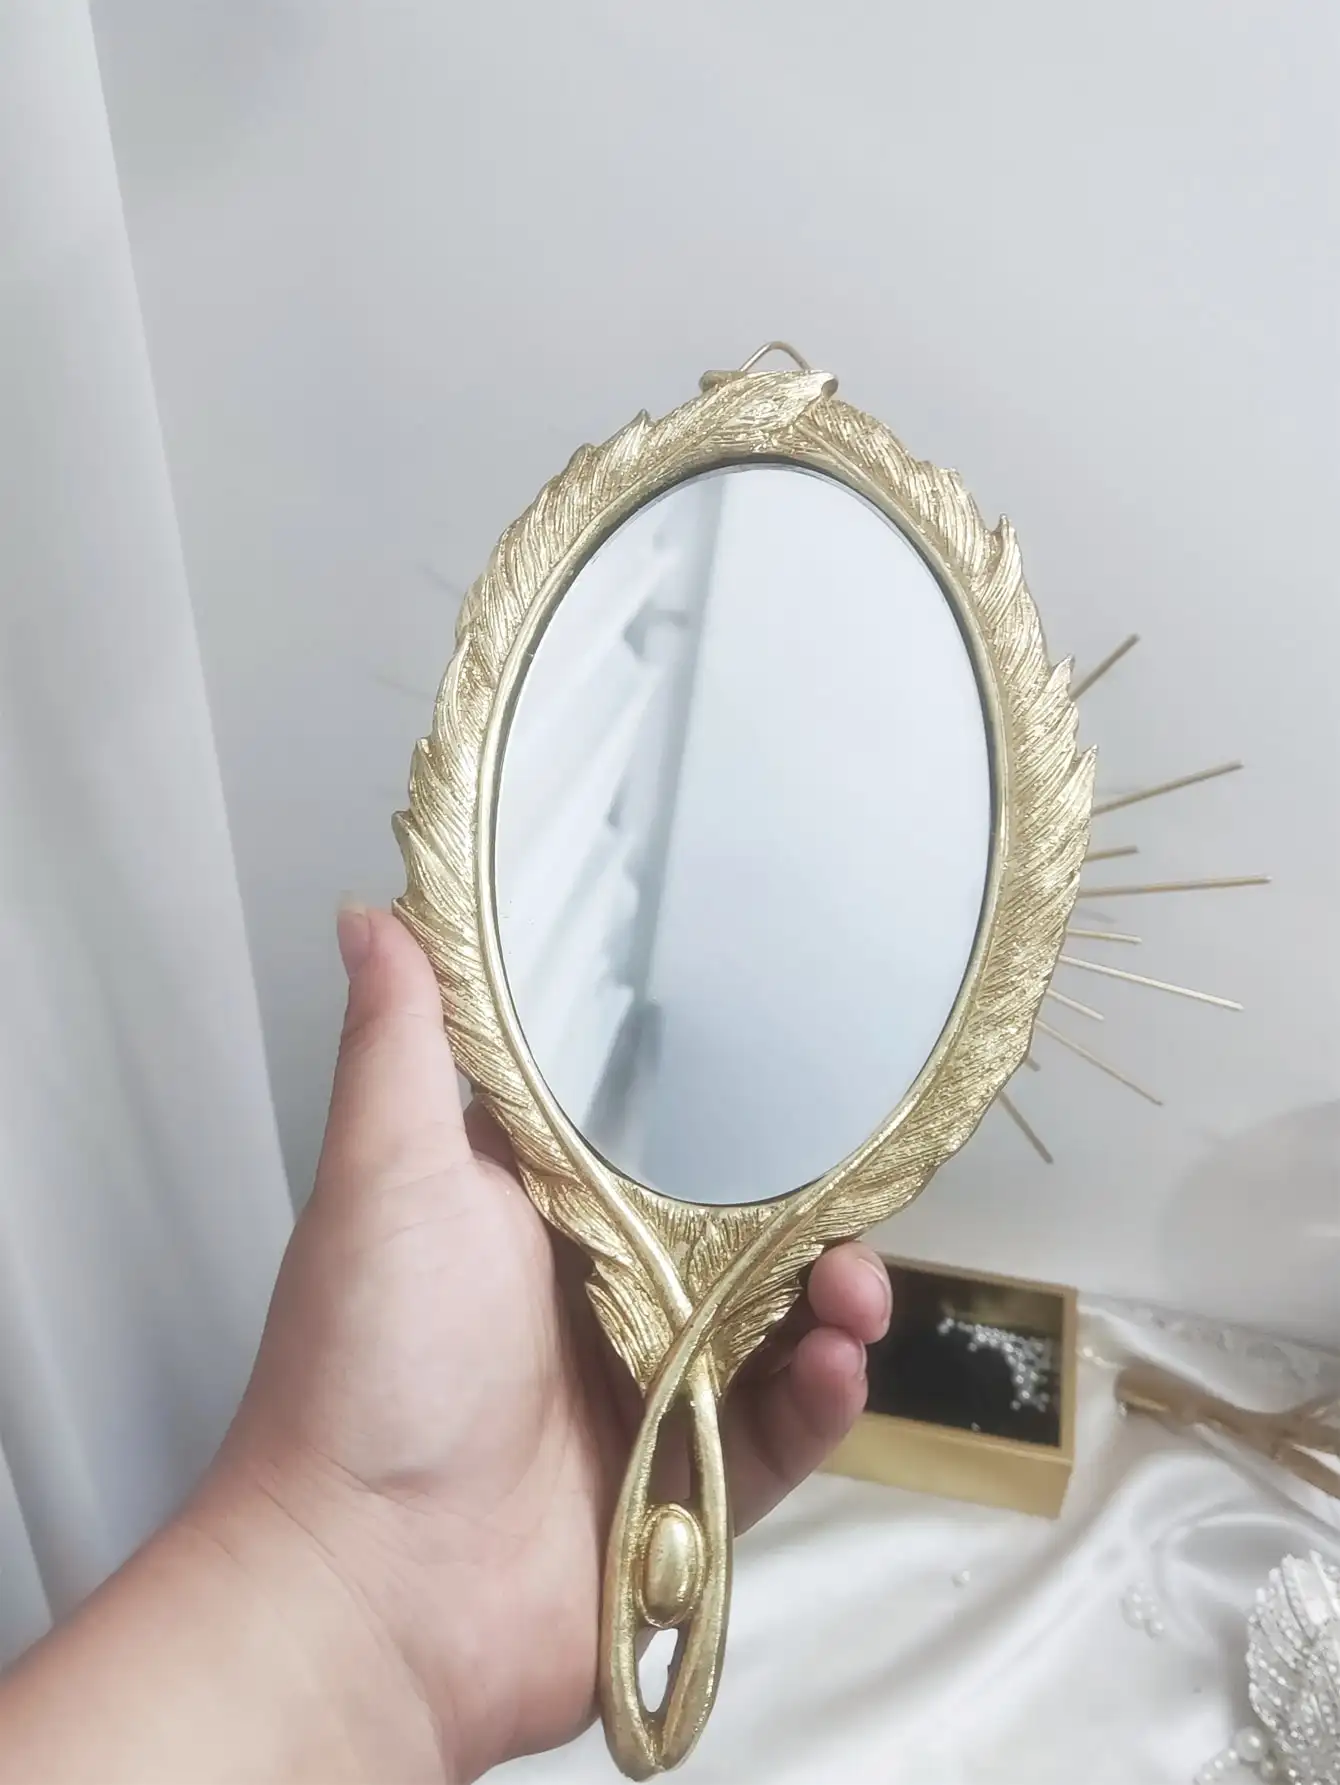 Handheld mirror Vintage resin feather gold and silver hanging mirror 1pc with European style baroque home decor